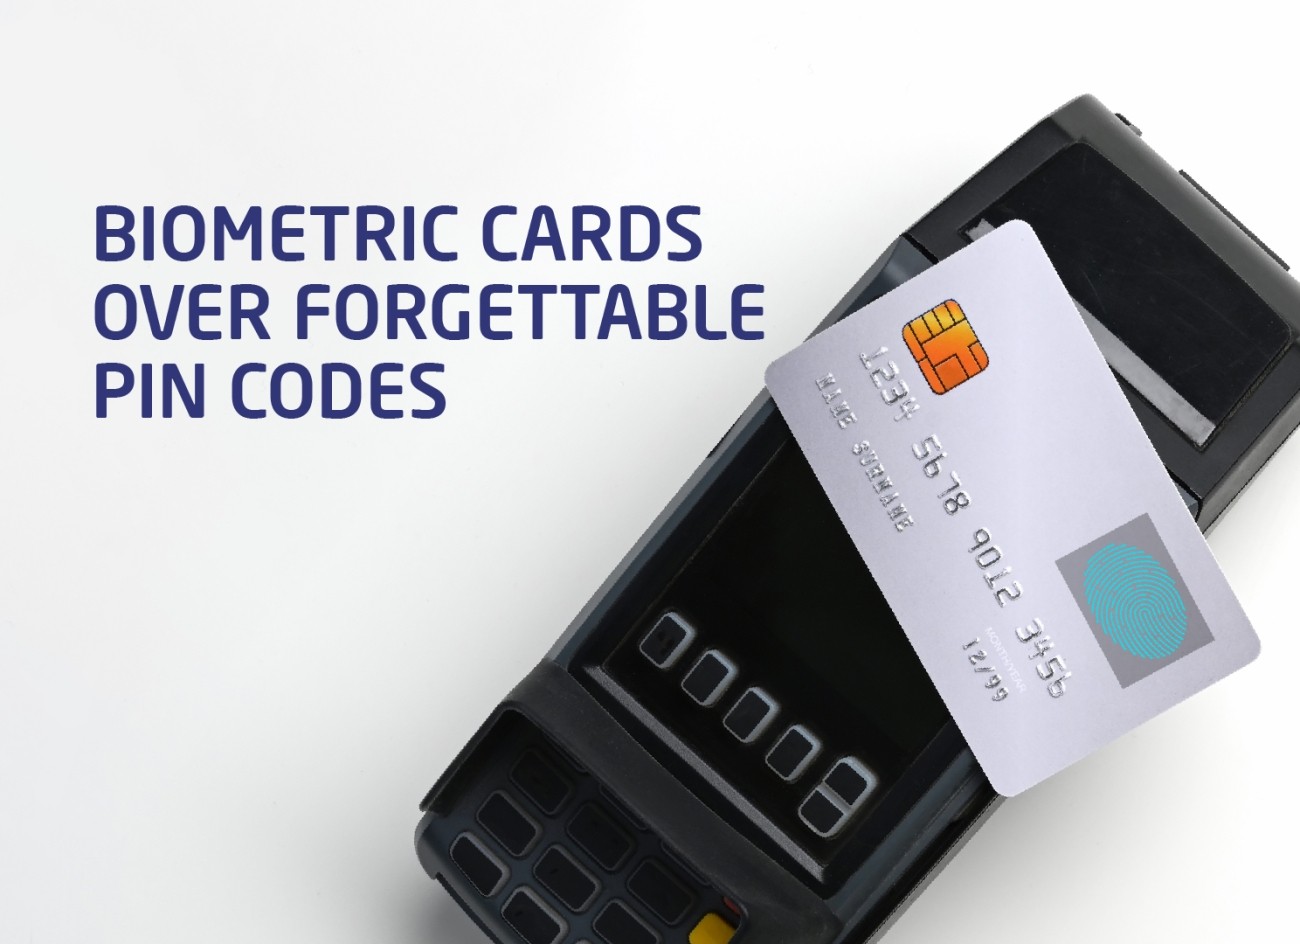 Biometric Cards Over Forgettable PIN Codes